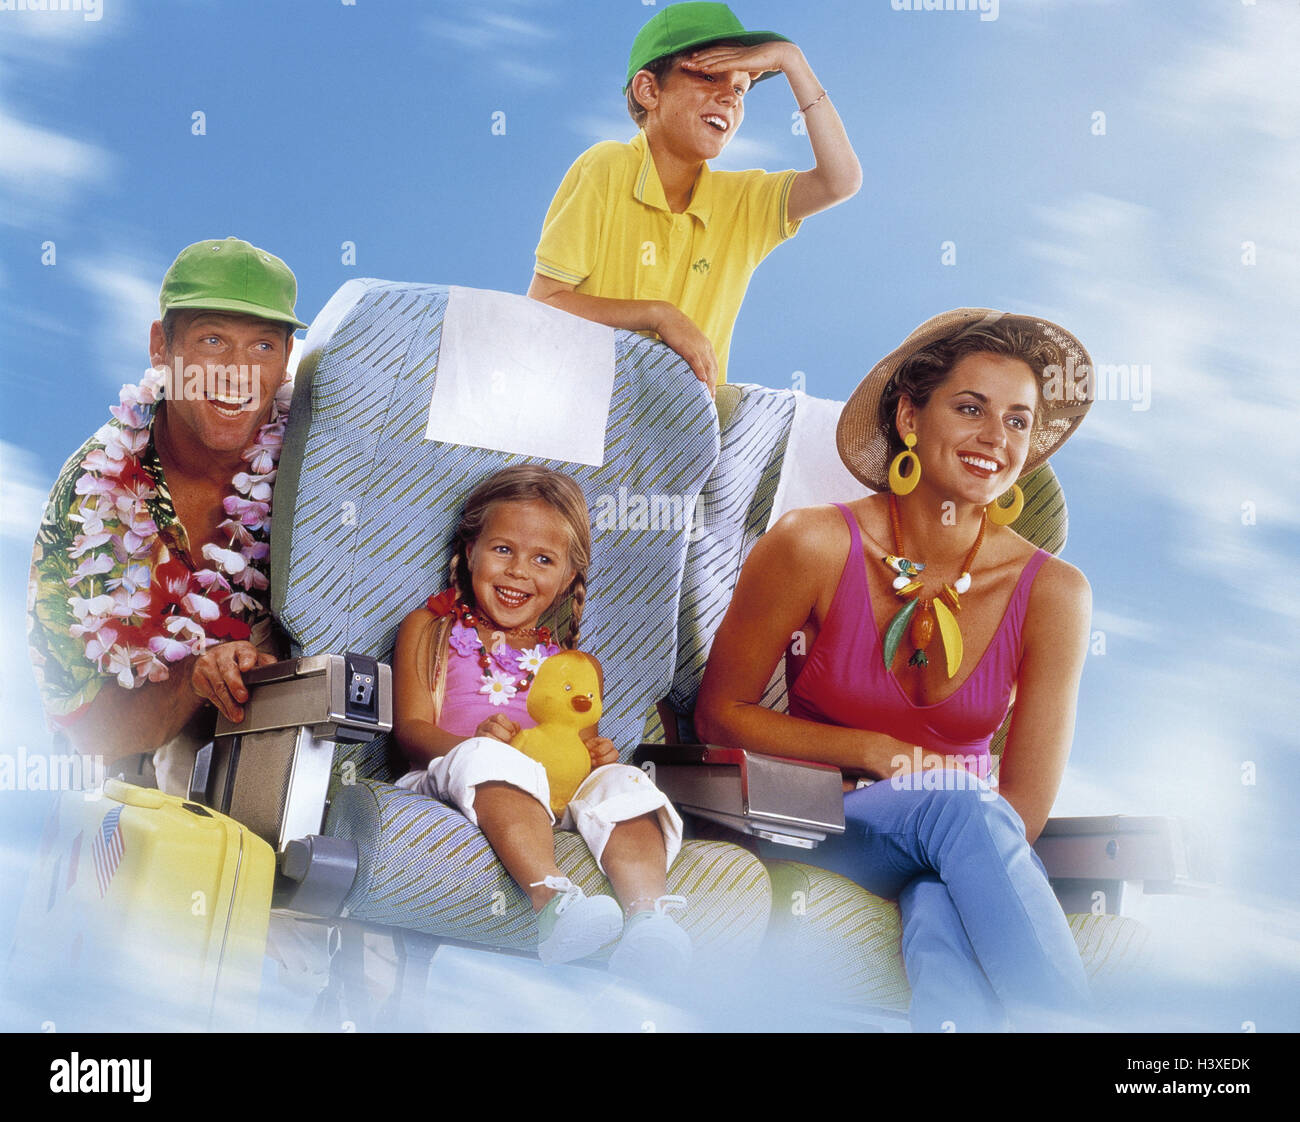 Family, icon, vacation, journey by air Holiday, summer, holiday trip, airplane, seats, parents, children, child, son, girl, subsidiary, boy, siblings, fly, foreign travel, long-term objective, air traffic, transport, promotion, holidays, travel, summer clothes, flower catena, joy, wish, dream, studio, Stock Photo